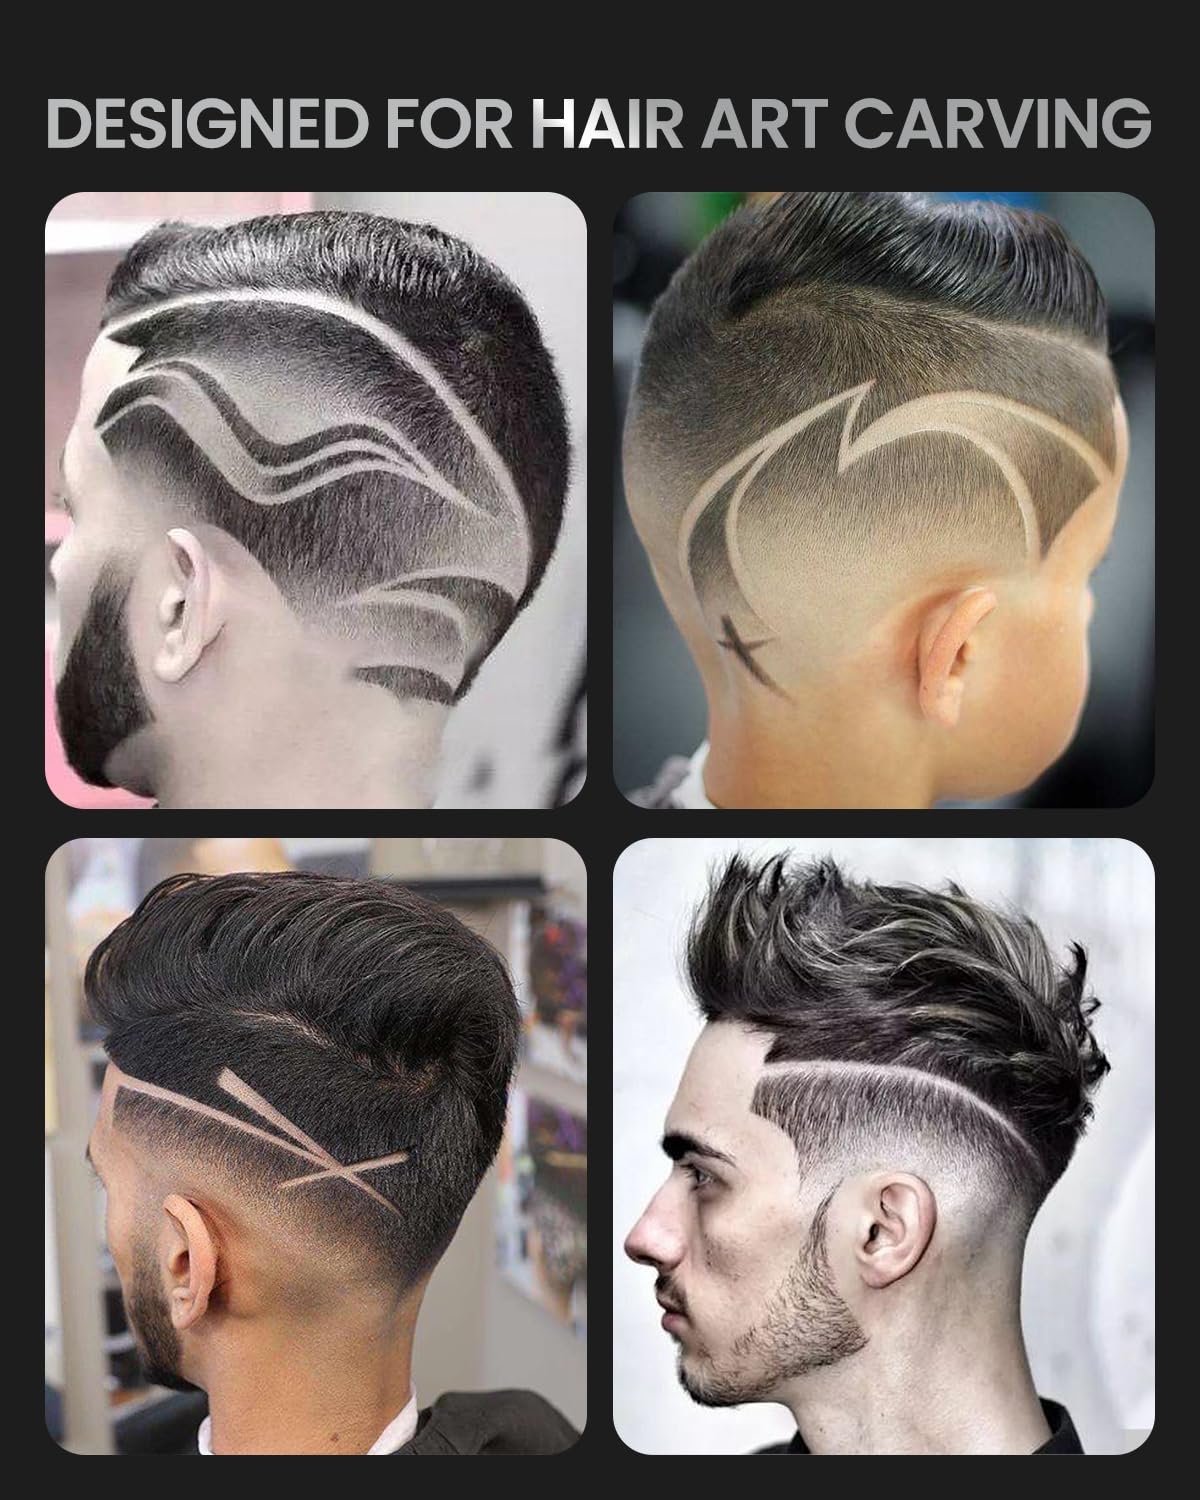 Four images showcasing intricate hair art designs on men. Top left: thick swirling lines and patterns on a faded cut using the Renpho EU Professional Cordless Hair Trimmer. Top right: sharp, angular lines with a clear fade using the Renpho EU Professional Cordless Hair Trimmer. Bottom left: crossed straight using the Renpho EU Professional Cordless Hair Trimmer.